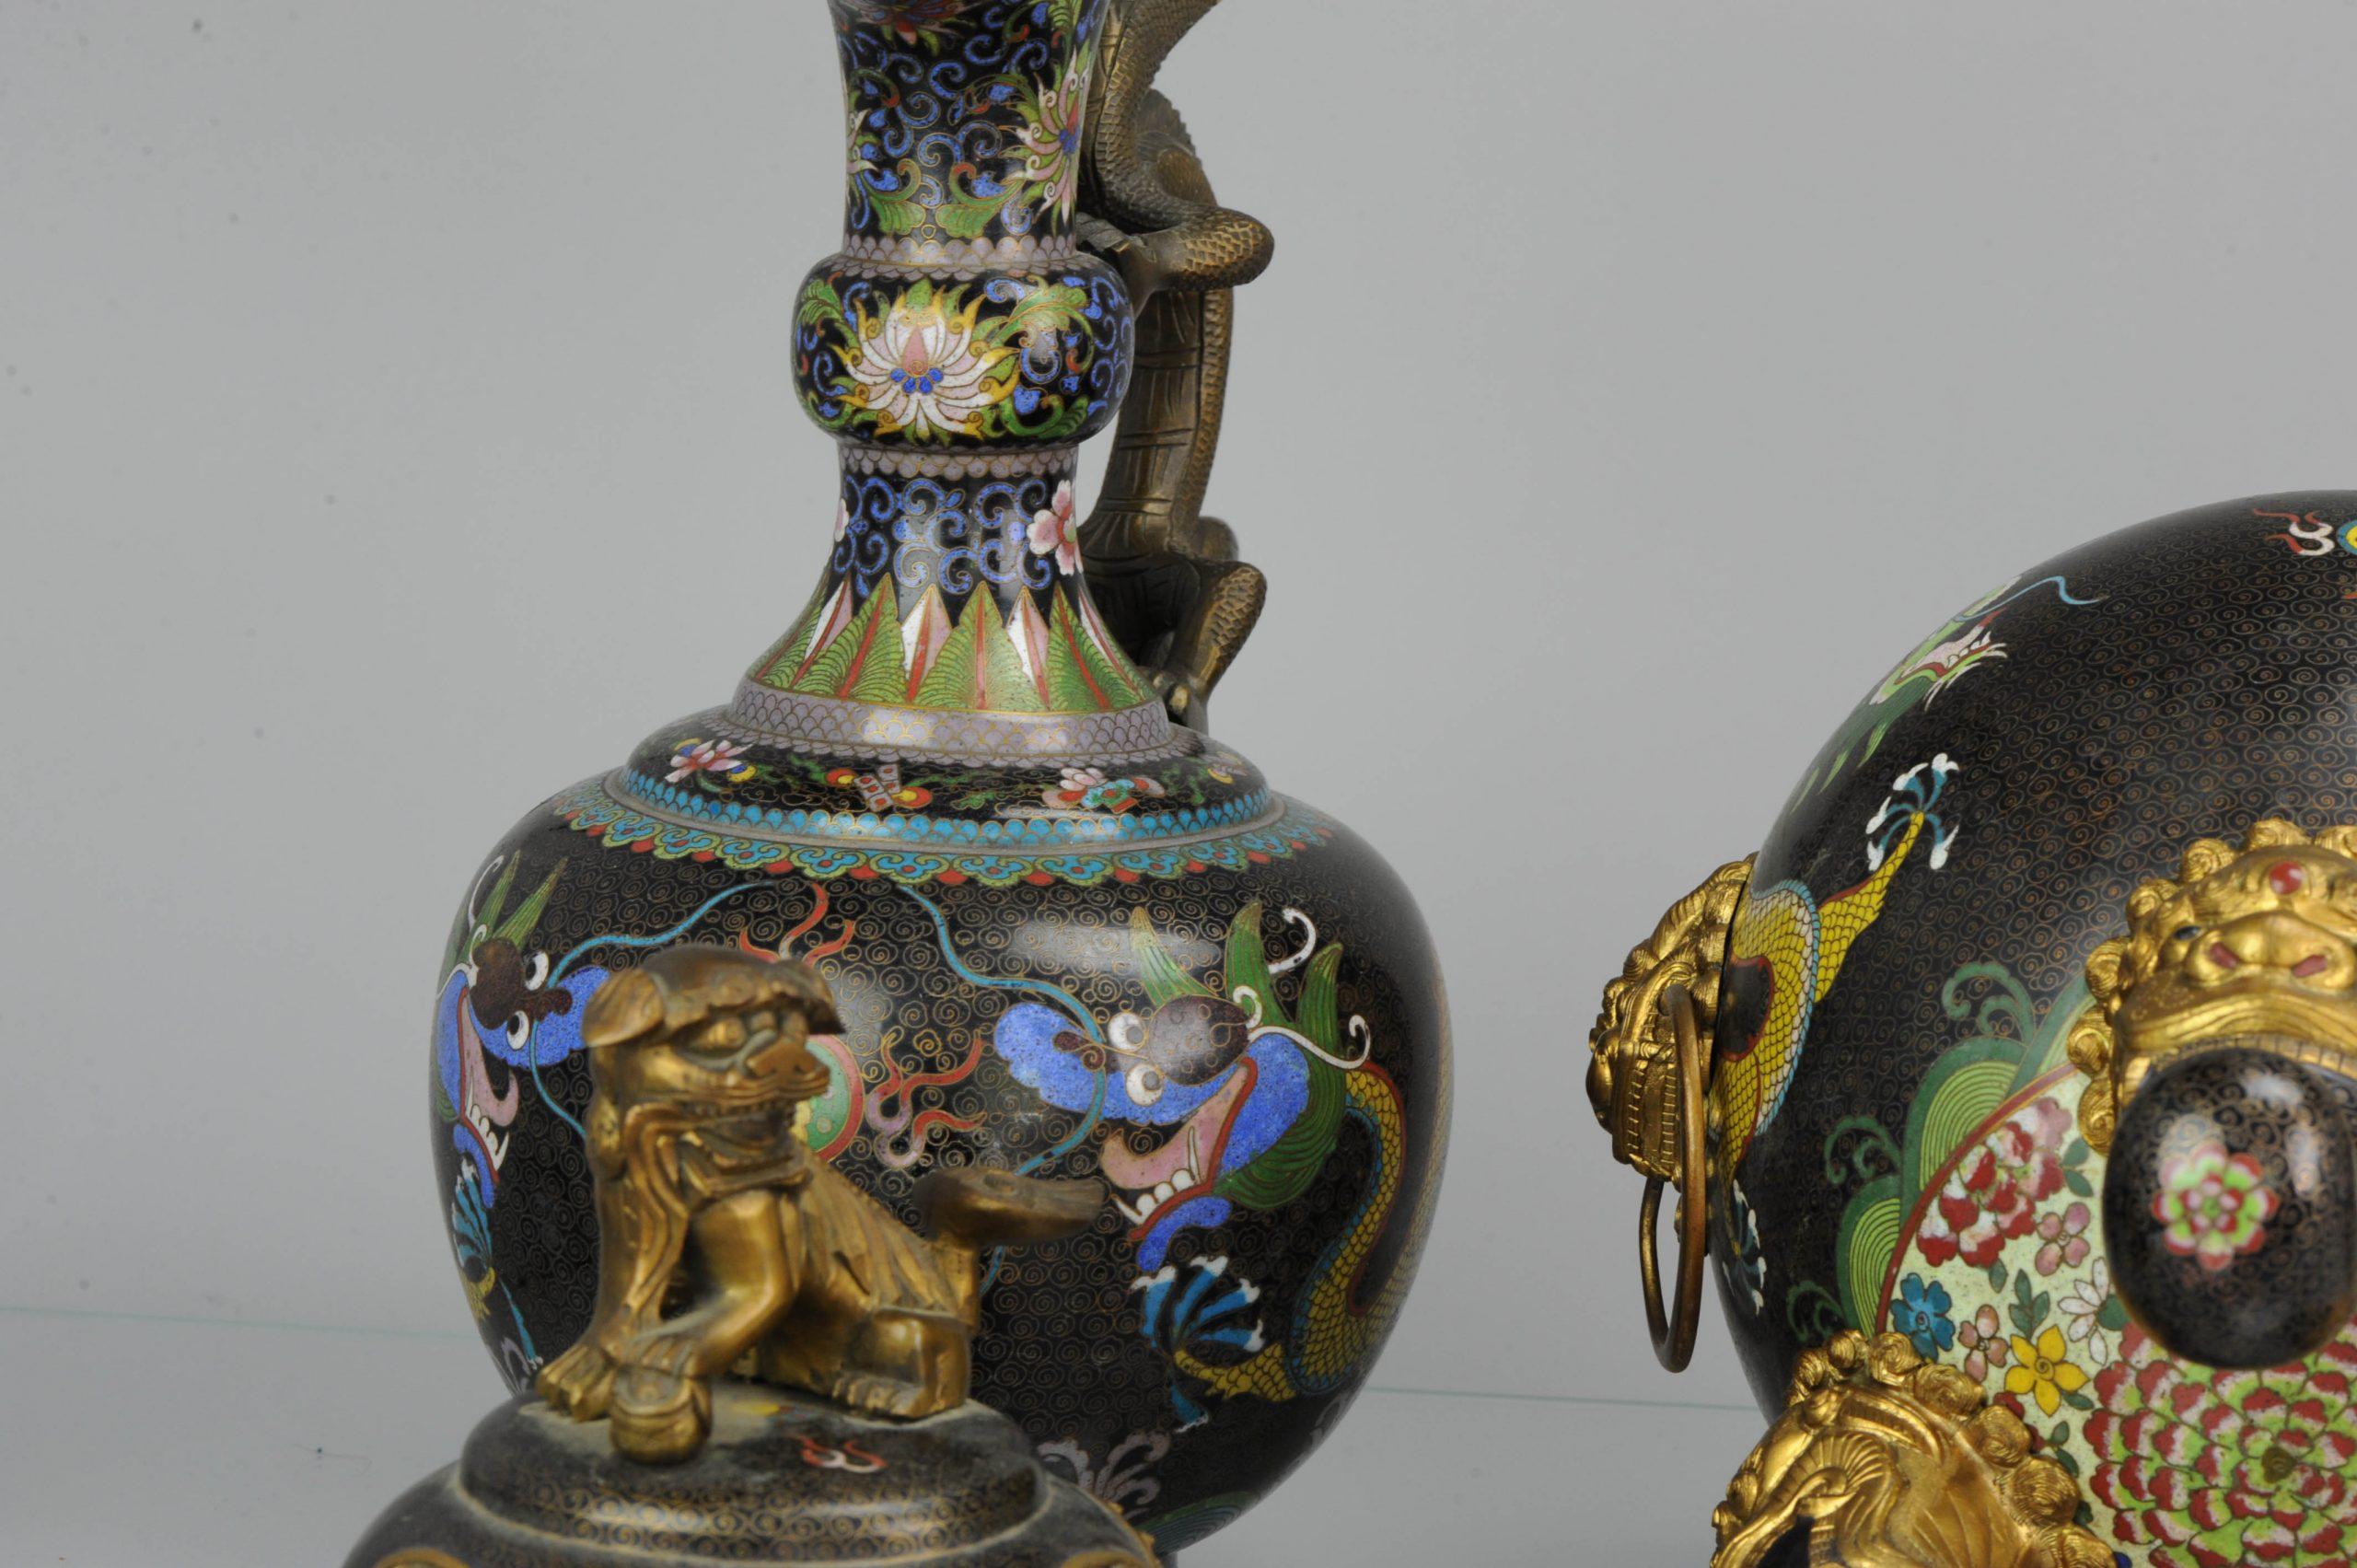 Antique 1900-1930 Cloisonné Incense Burner and Jug Garniture Antique China In Good Condition For Sale In Amsterdam, Noord Holland